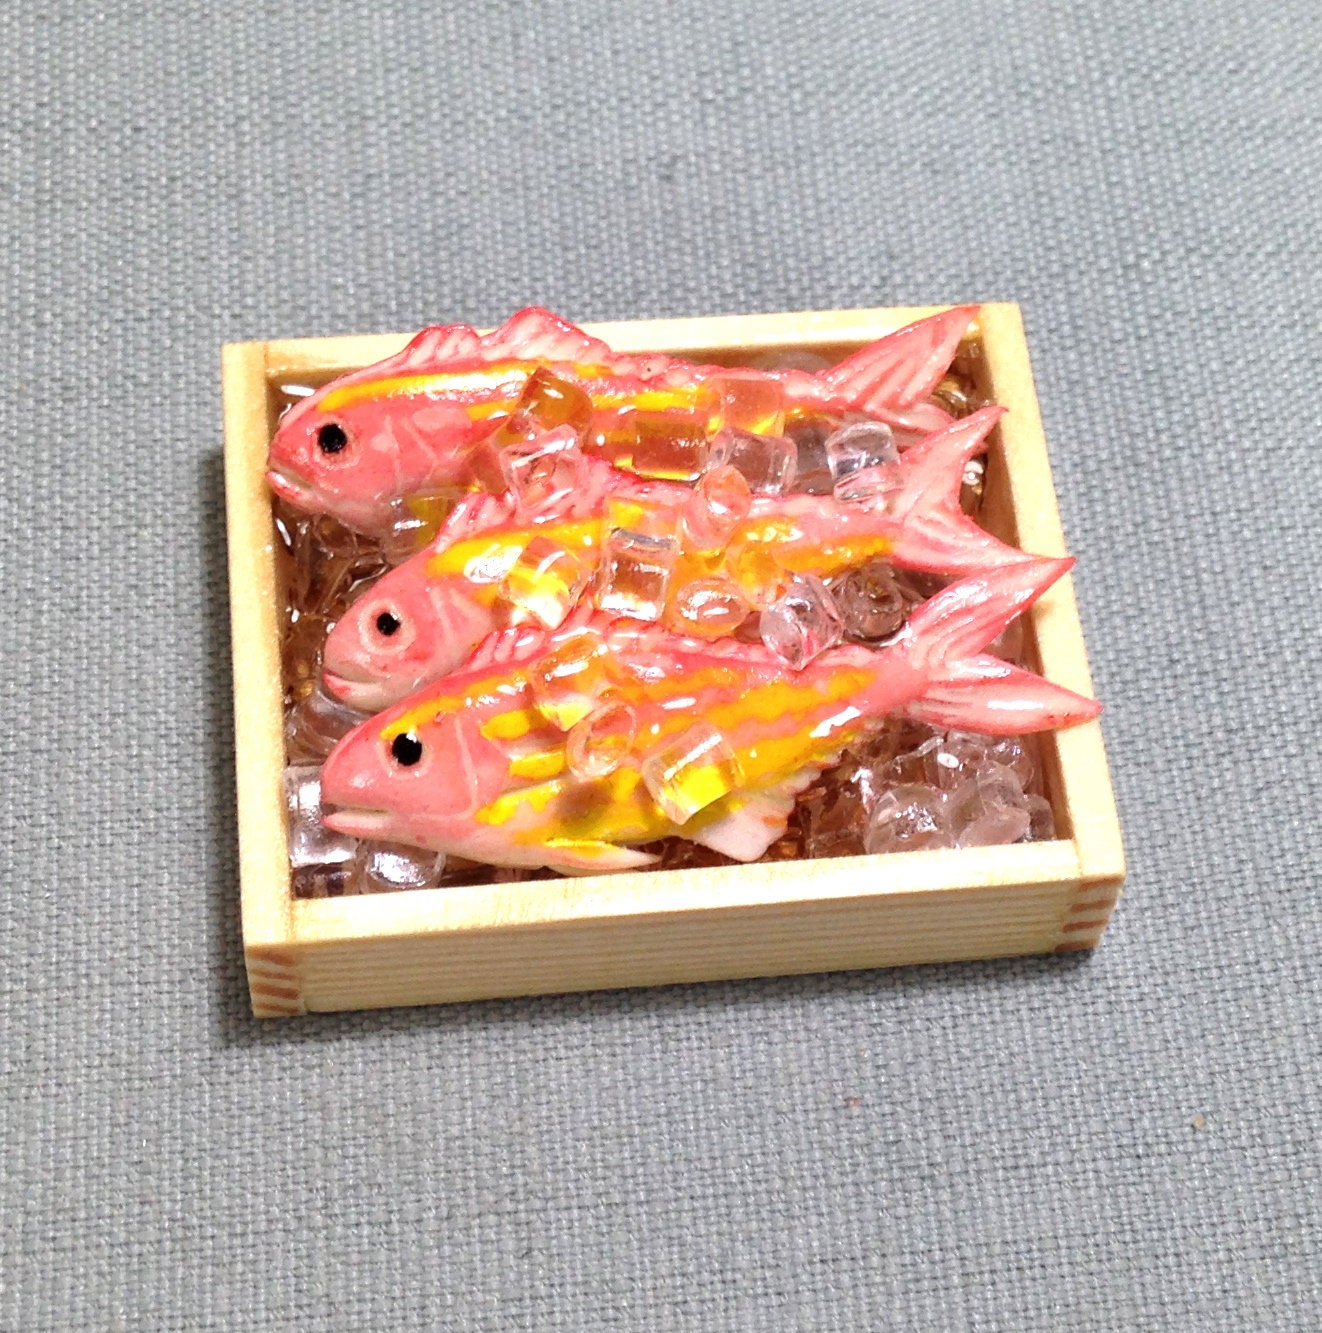 Fishes Tray Miniature Dollhouse Clay Polymer Food Supply Seafood Fish Cute Small Ice Cube Dish Wood Display Jewelry Supplies 1/12 Deco